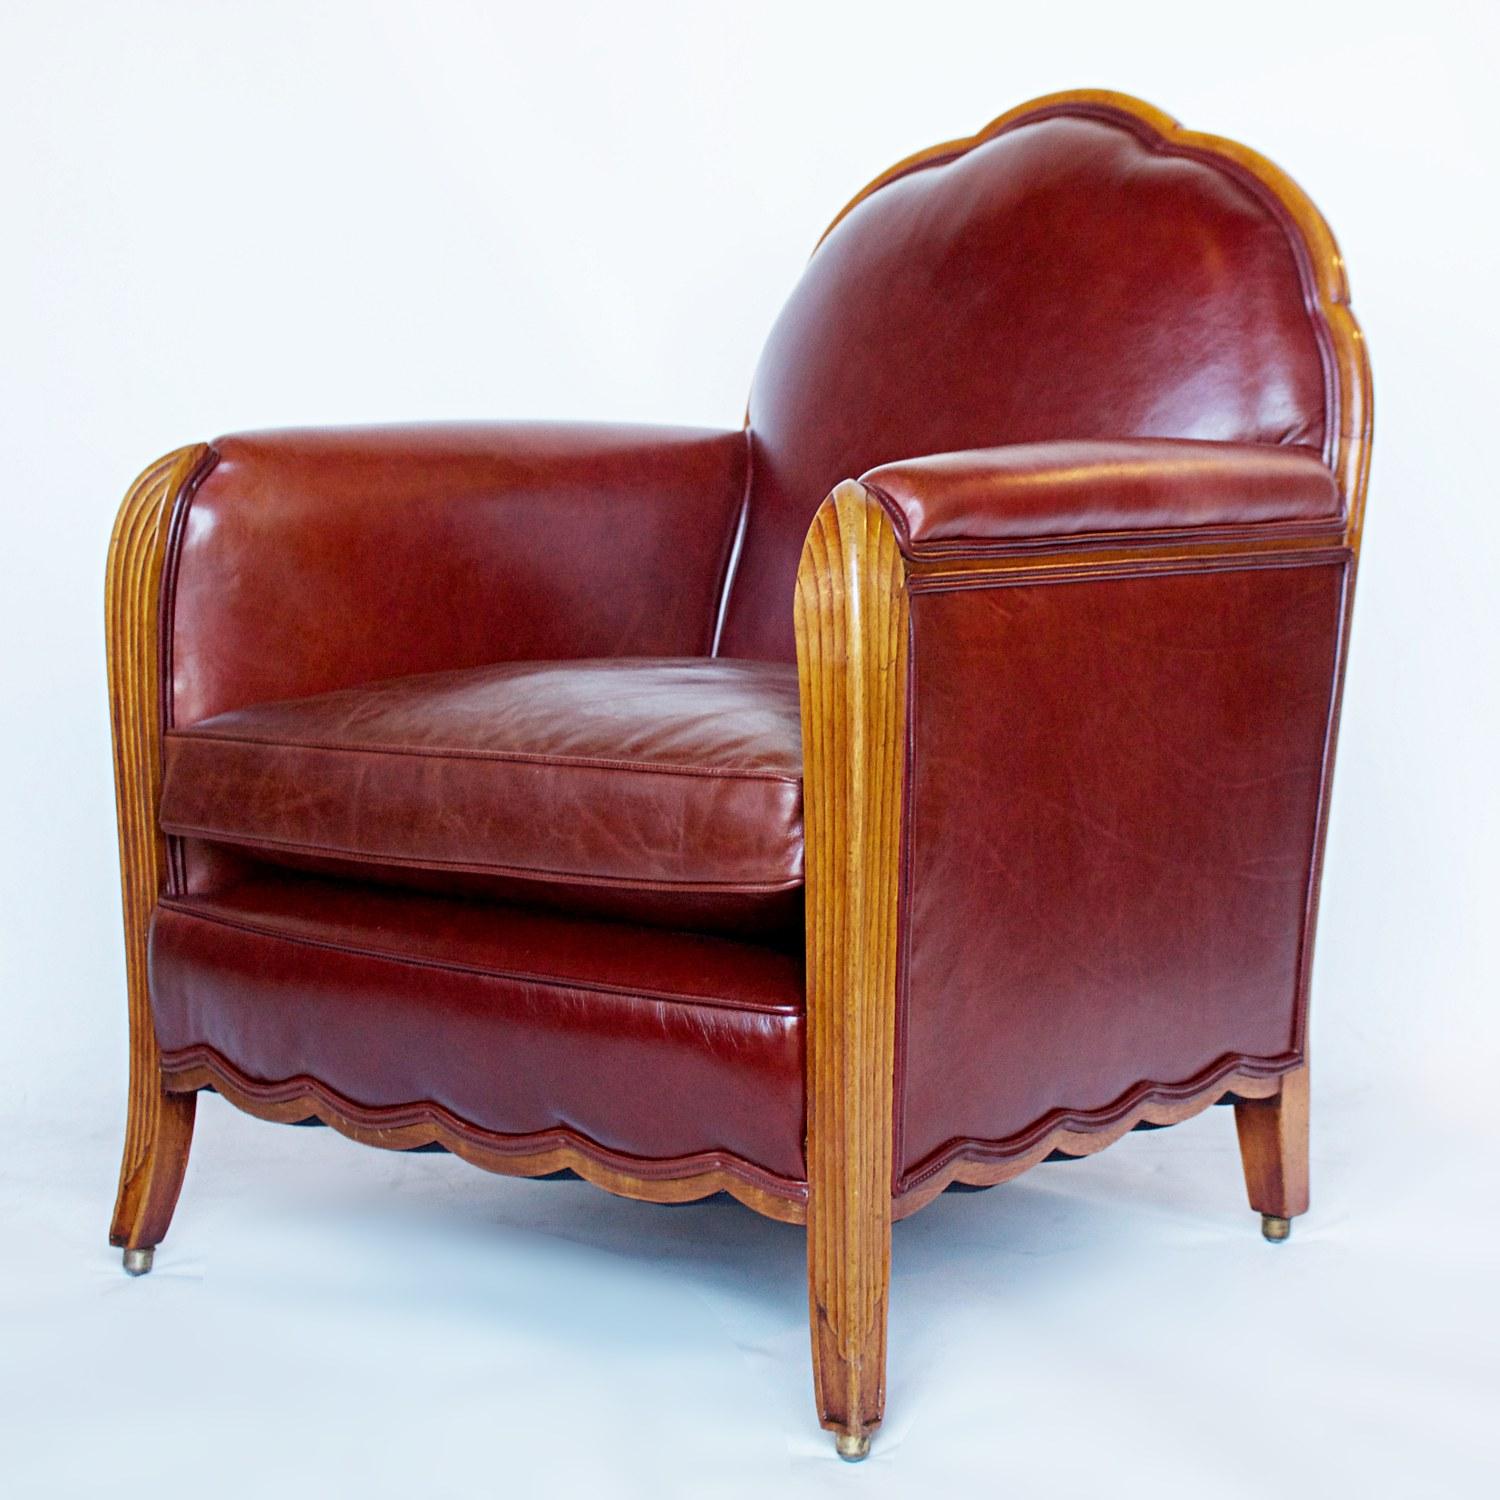 A pair of Art Deco armchairs. Fluted legs with bevelled detailed frame. Solid walnut throughout. Re-upholstered in chestnut leather. 

Dimensions: H 89cm W 72cm D 72cm Seat H 43cm W 50cm D 50cm

Origin: French

Date, circa 1925

Item Number: